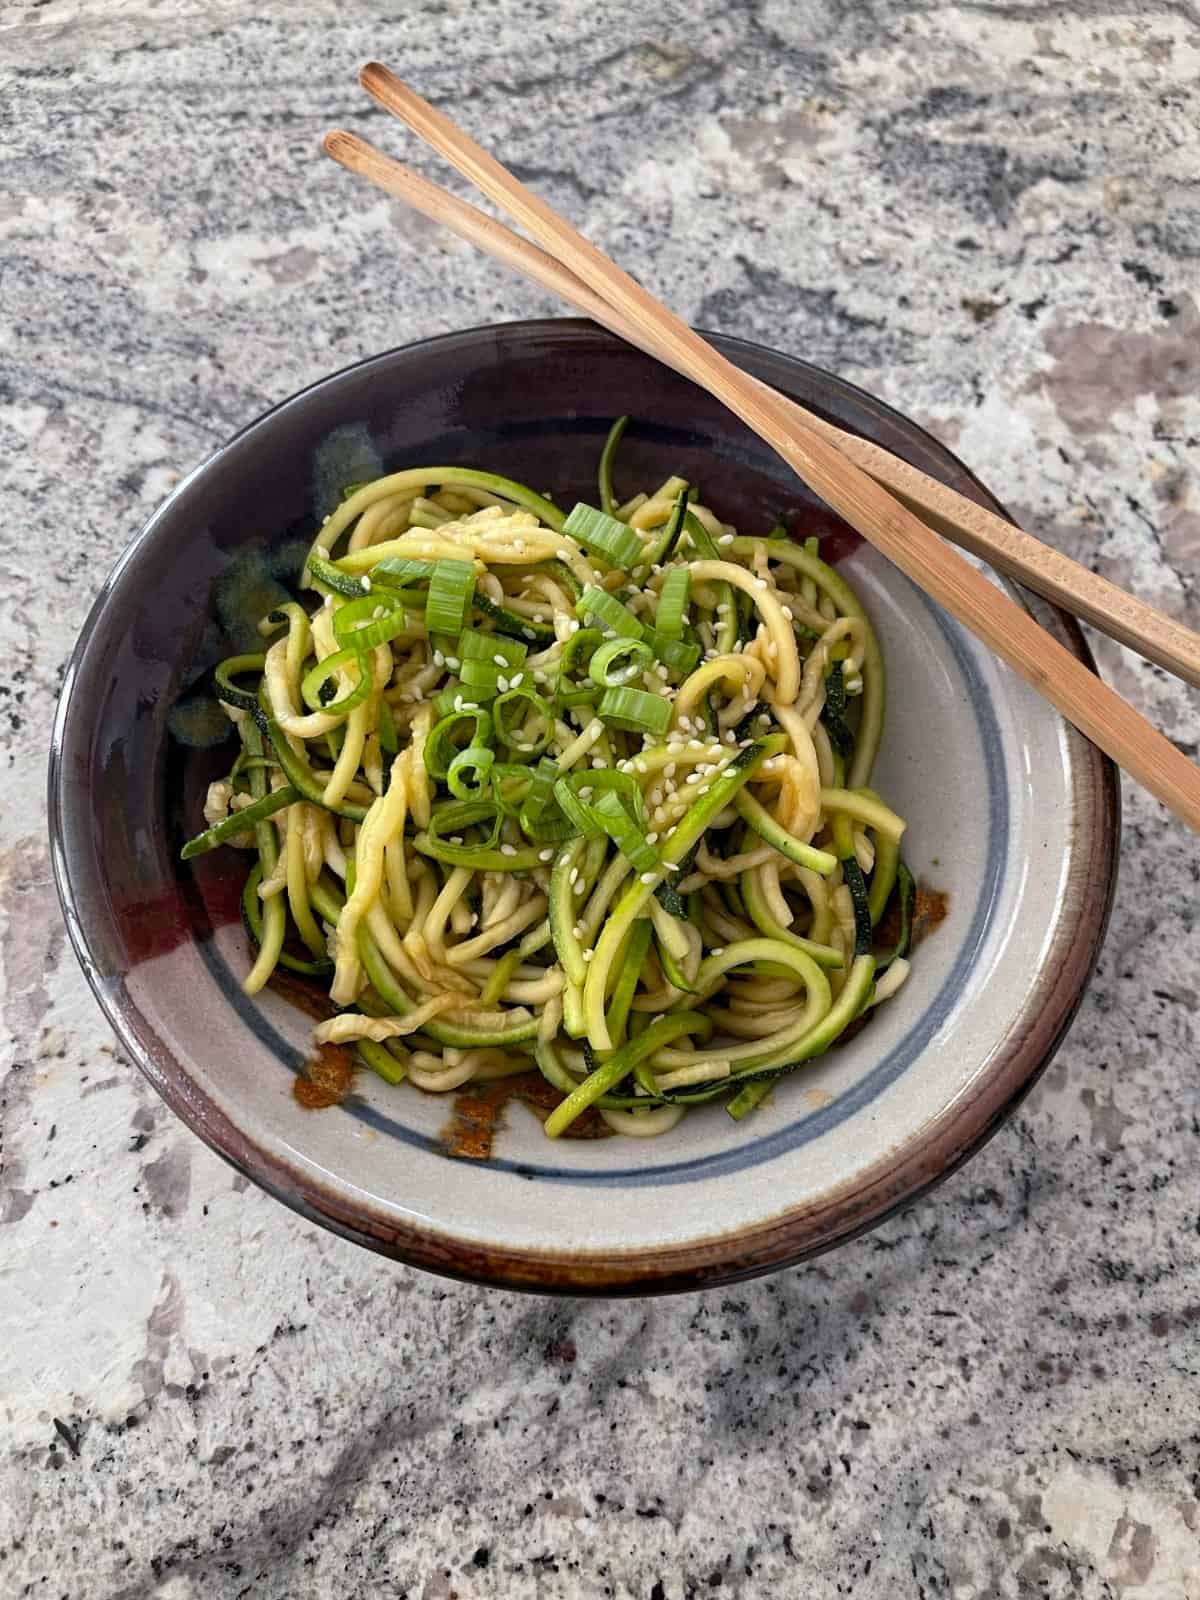 Sesame zucchini noodles garnished with green onion slices and sesame seeds in bowl with chop sticks.